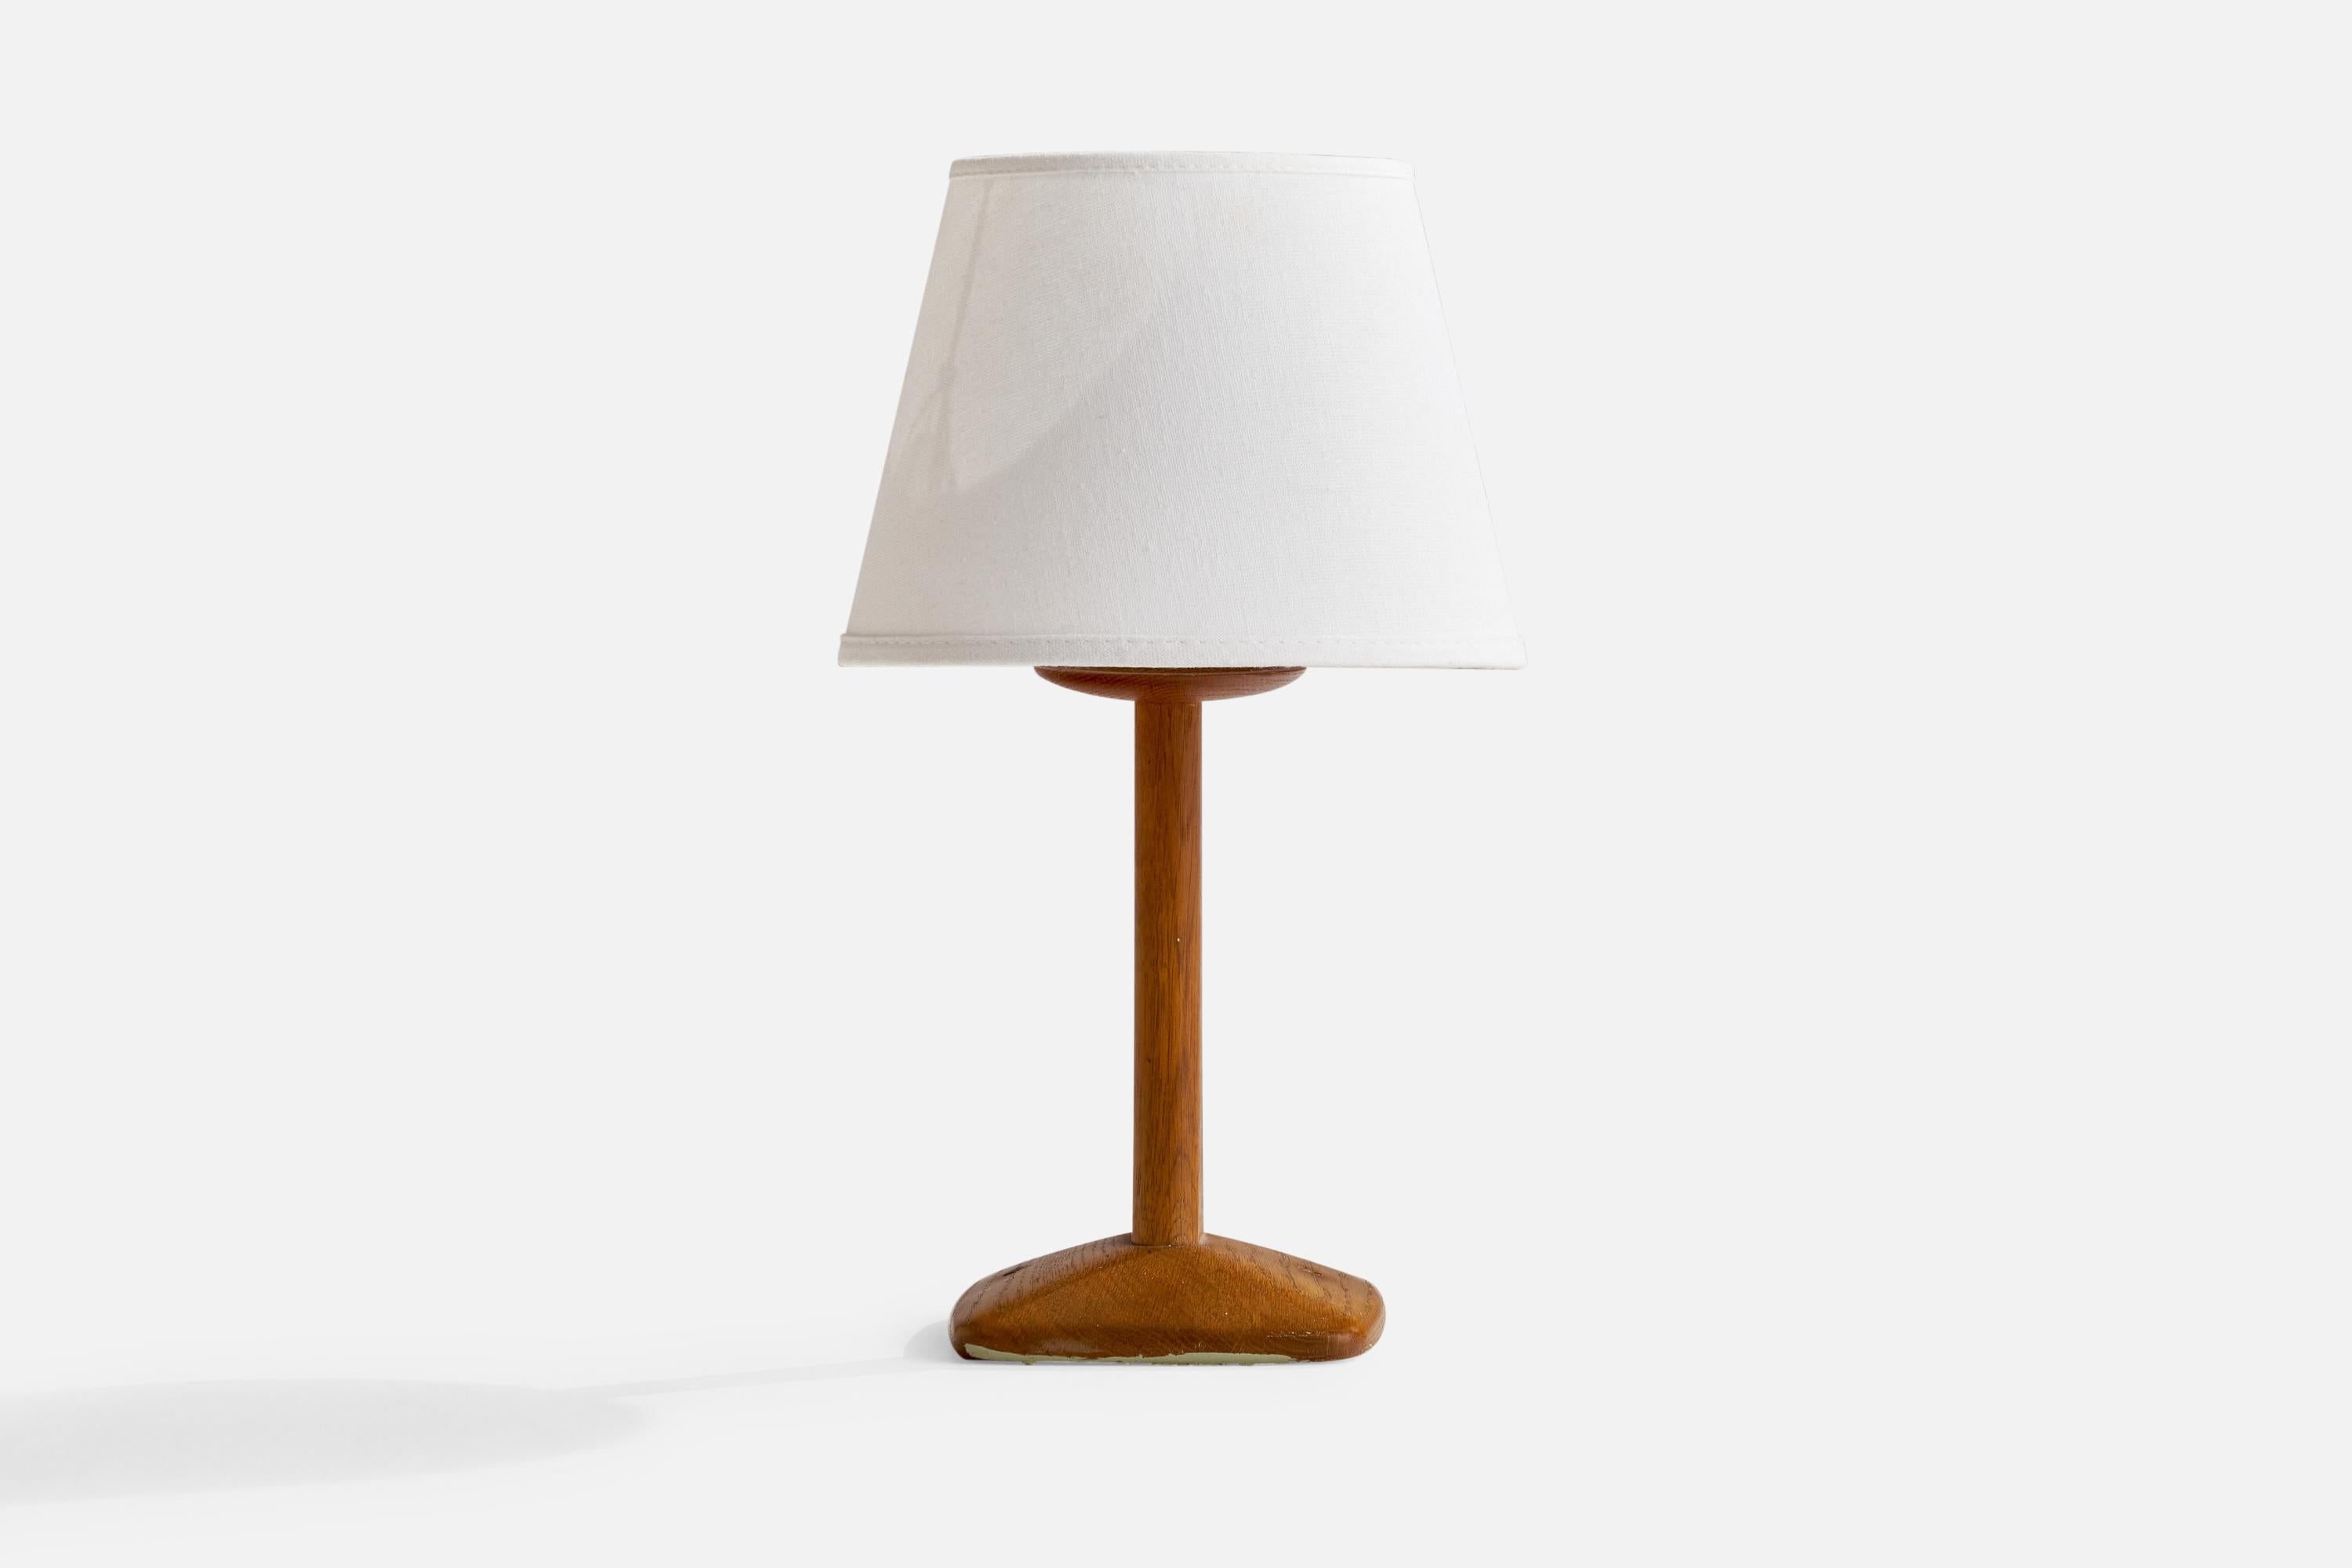 A teak table lamp designed by Uno and Östen Kristiansson and produced by Luxus, Vittsjö. Sweden, c. 1960s.

Overall Dimensions (inches): 14” H x 7.75” W x 5.1” D
Stated dimensions include shade.
Bulb Specifications: E-26 Bulb
Number of Sockets: